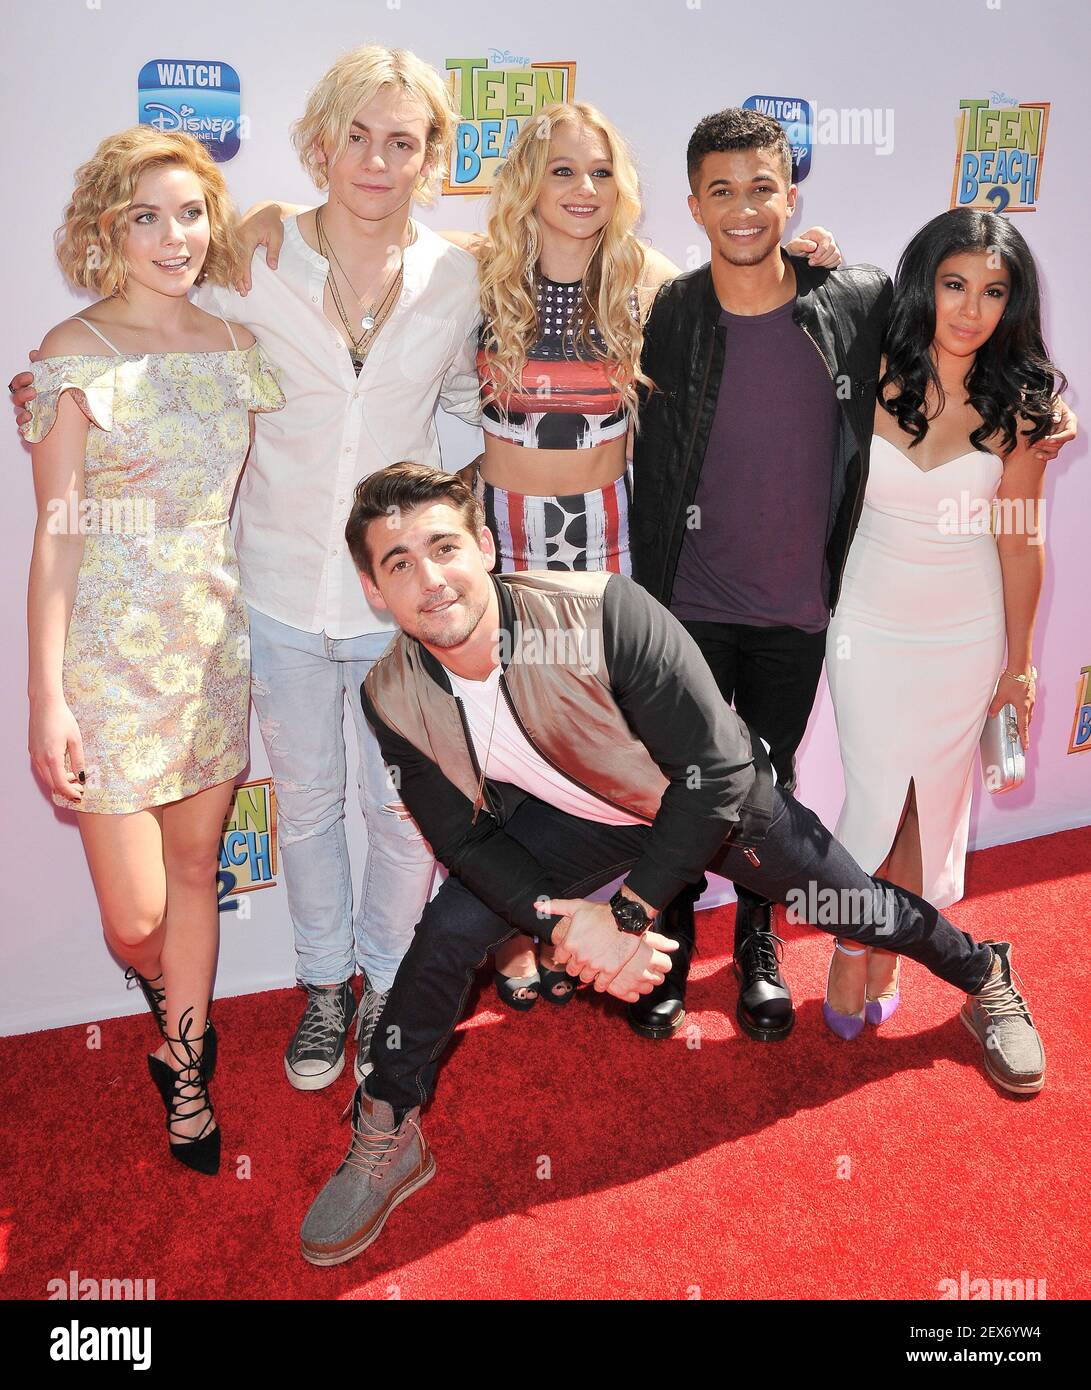 L-R) Grace Phipps, Ross Lynch, Mollee Gray, Jordan Fisher, Chrissie Fit and Johnny DeLuca arrives at The Disney "Teen Beach 2" Los Angeles Premiere held at the Walt Disney Studios in